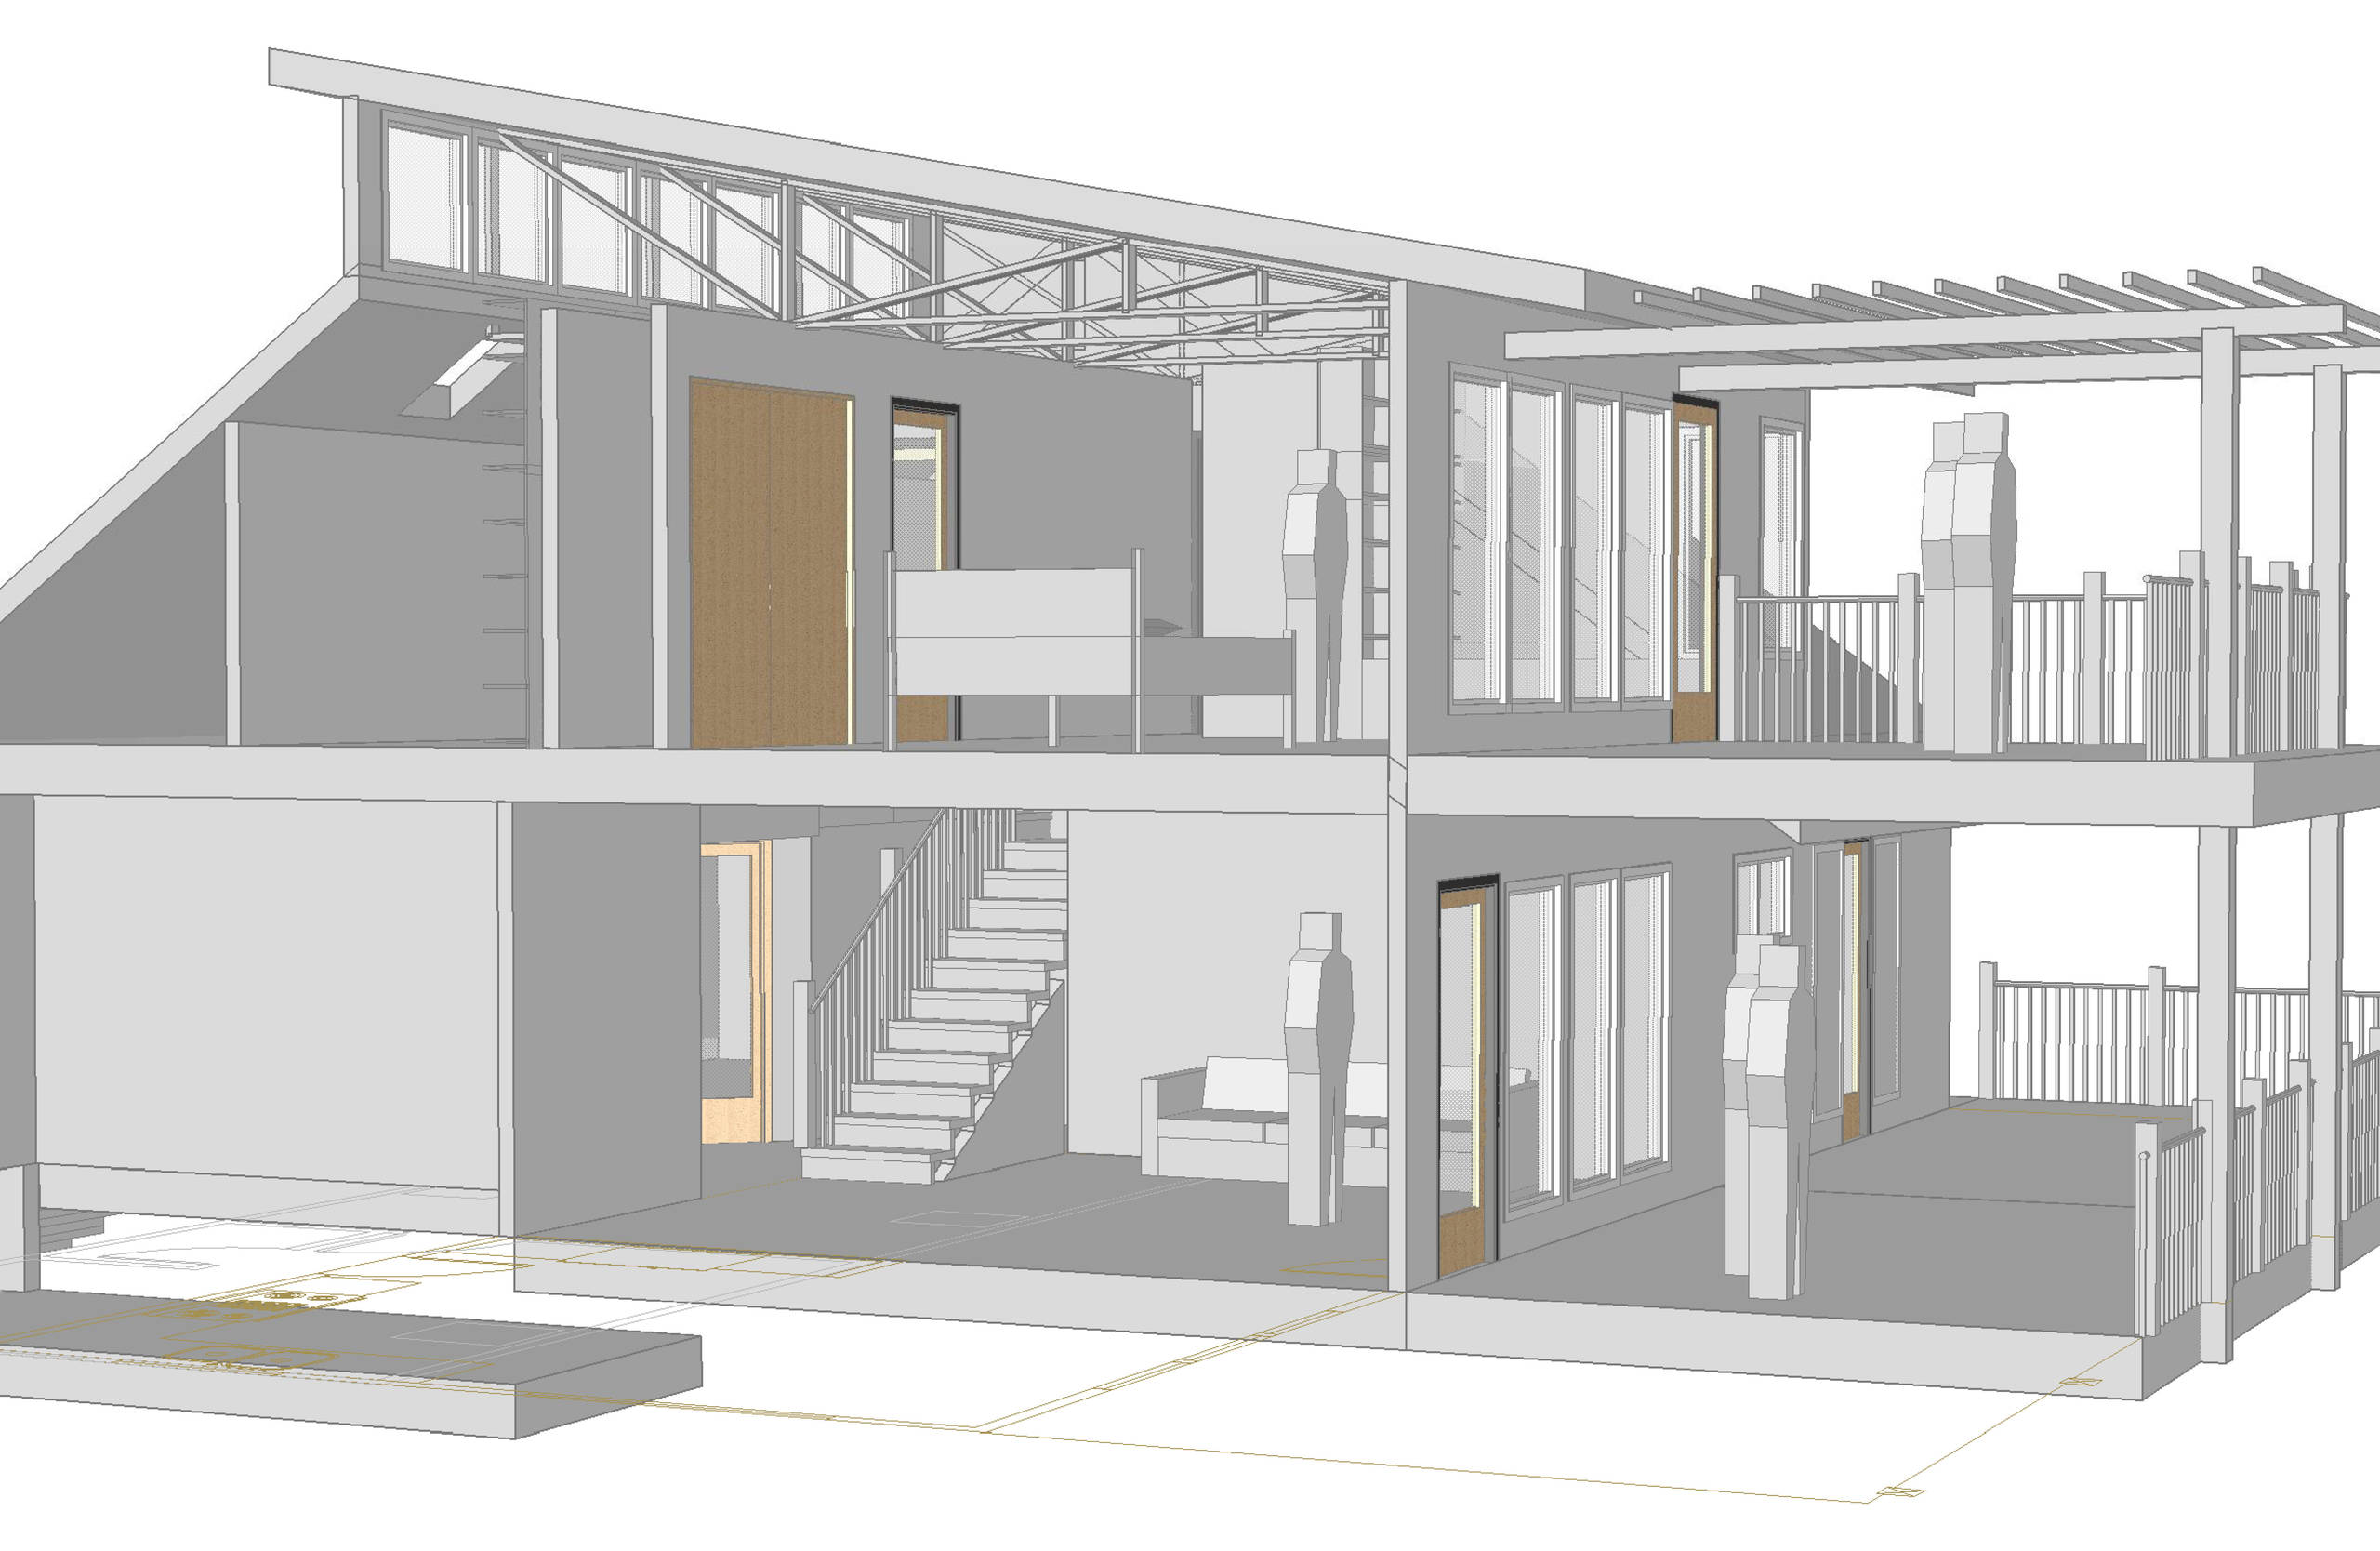 Section View showing lower living/deck and upper master bedroom and deck